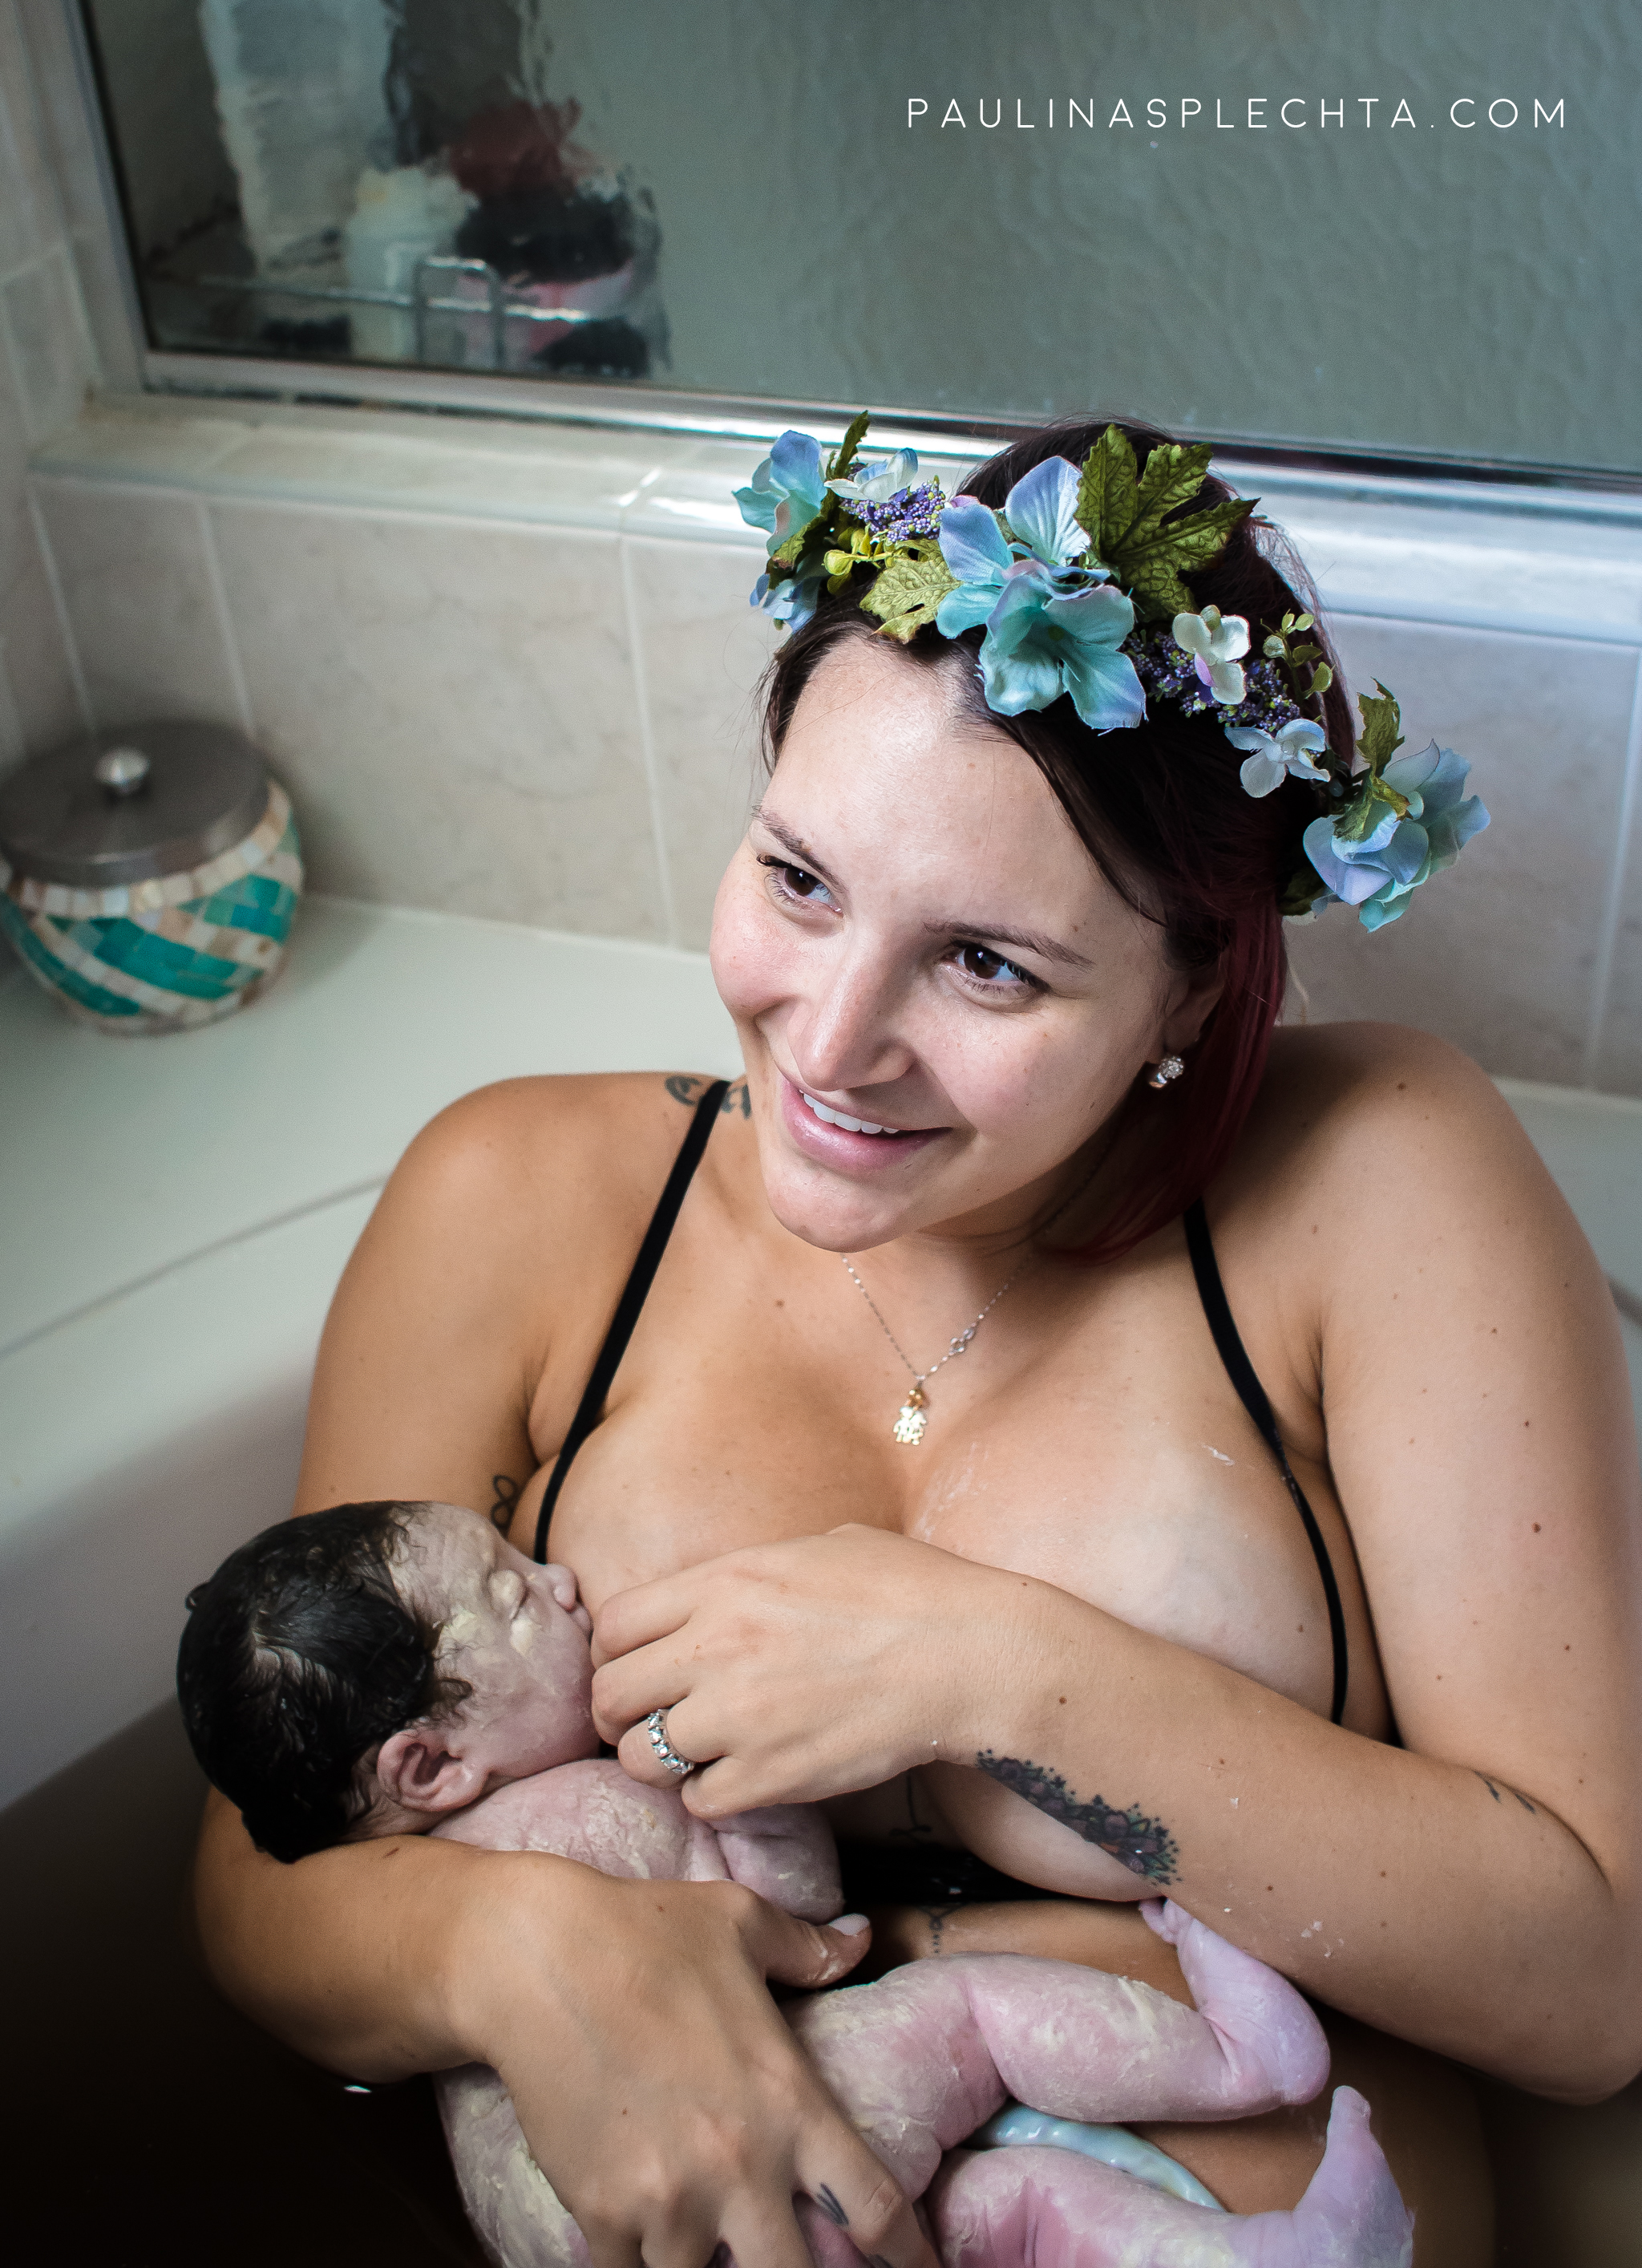 home-birth-deerfield-beach-broward-birth-photographer-photography-videographer-video-gelena-hinkley-midwife-delayed-cord-clamping-placenta-dad-catches-baby-bath-tub-water-unmedicated-green-path-baby-greenpath-cloth-diaper-service-wetbag-grovia.jpg